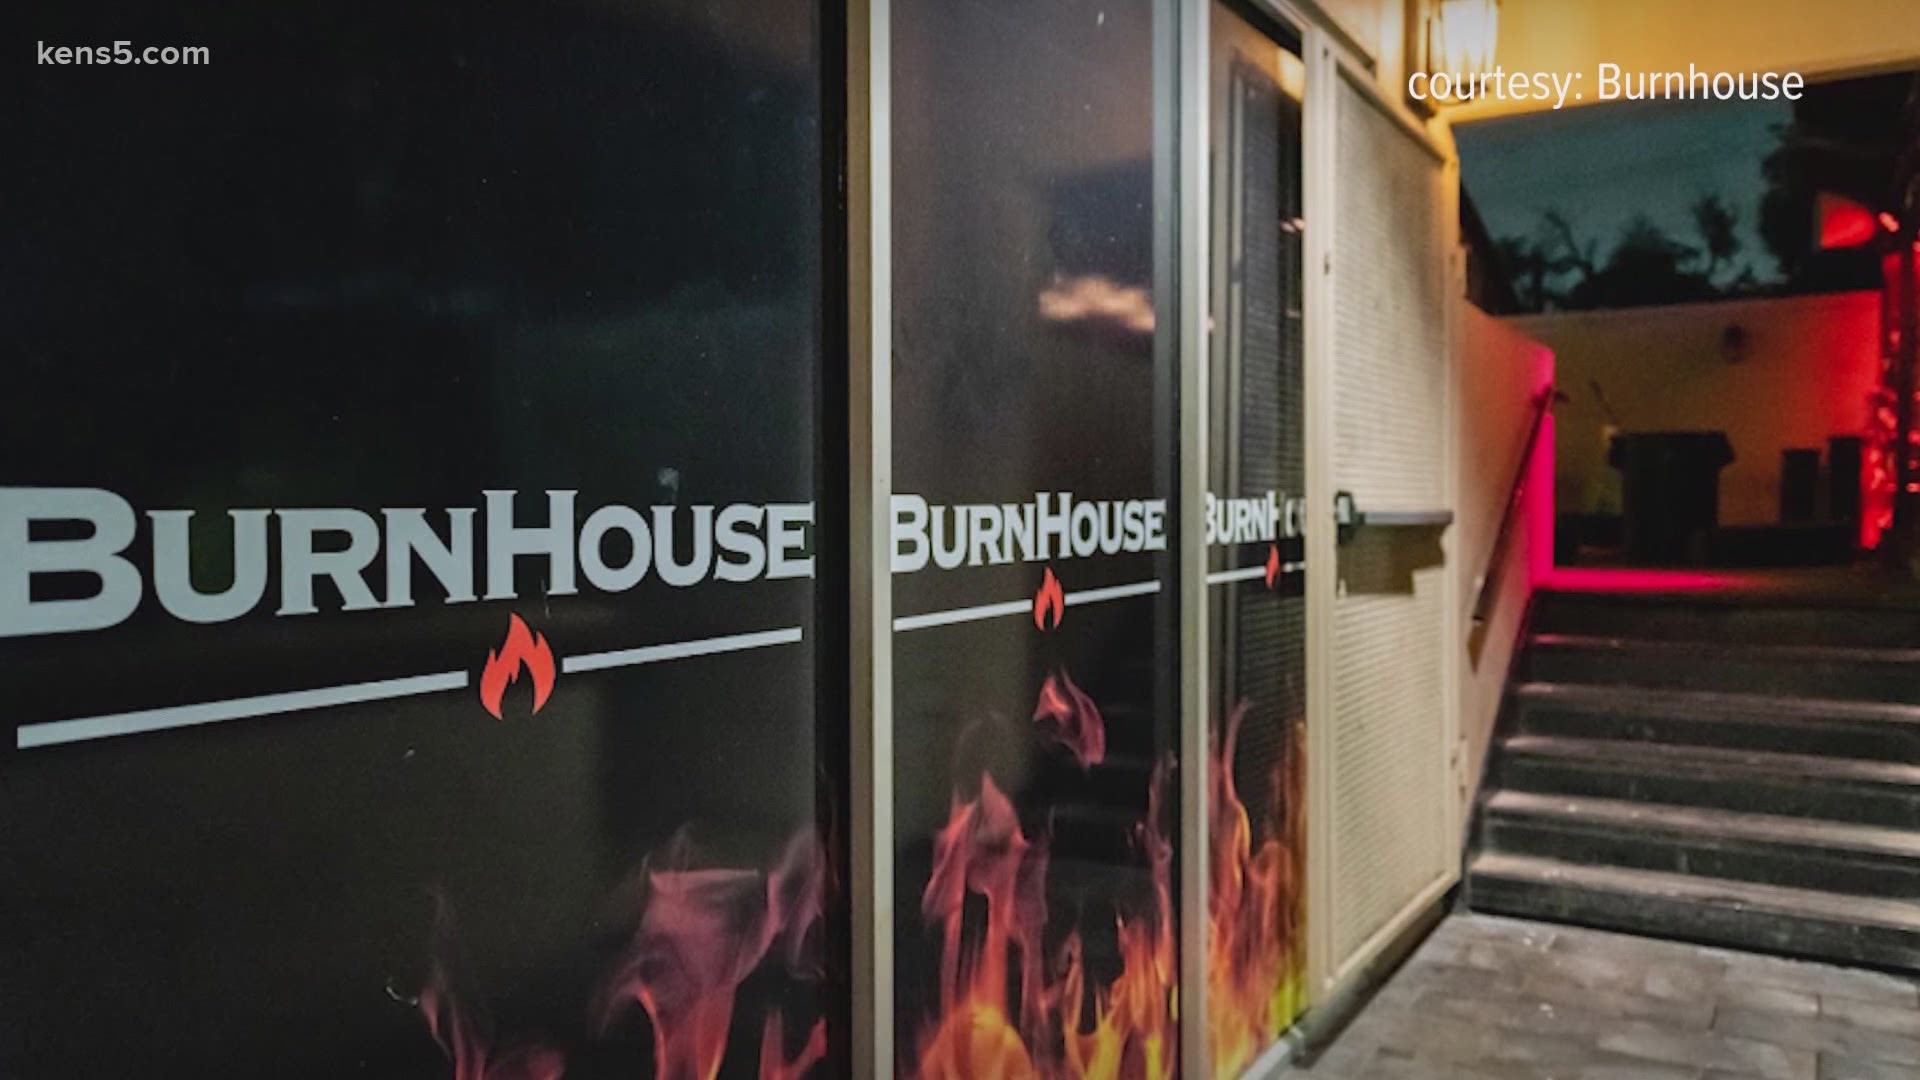 A TABC suspension order states Burnhouse didn't comply with social distancing orders over the weekend and as a result, had its liquor permit revoked for 30 days.